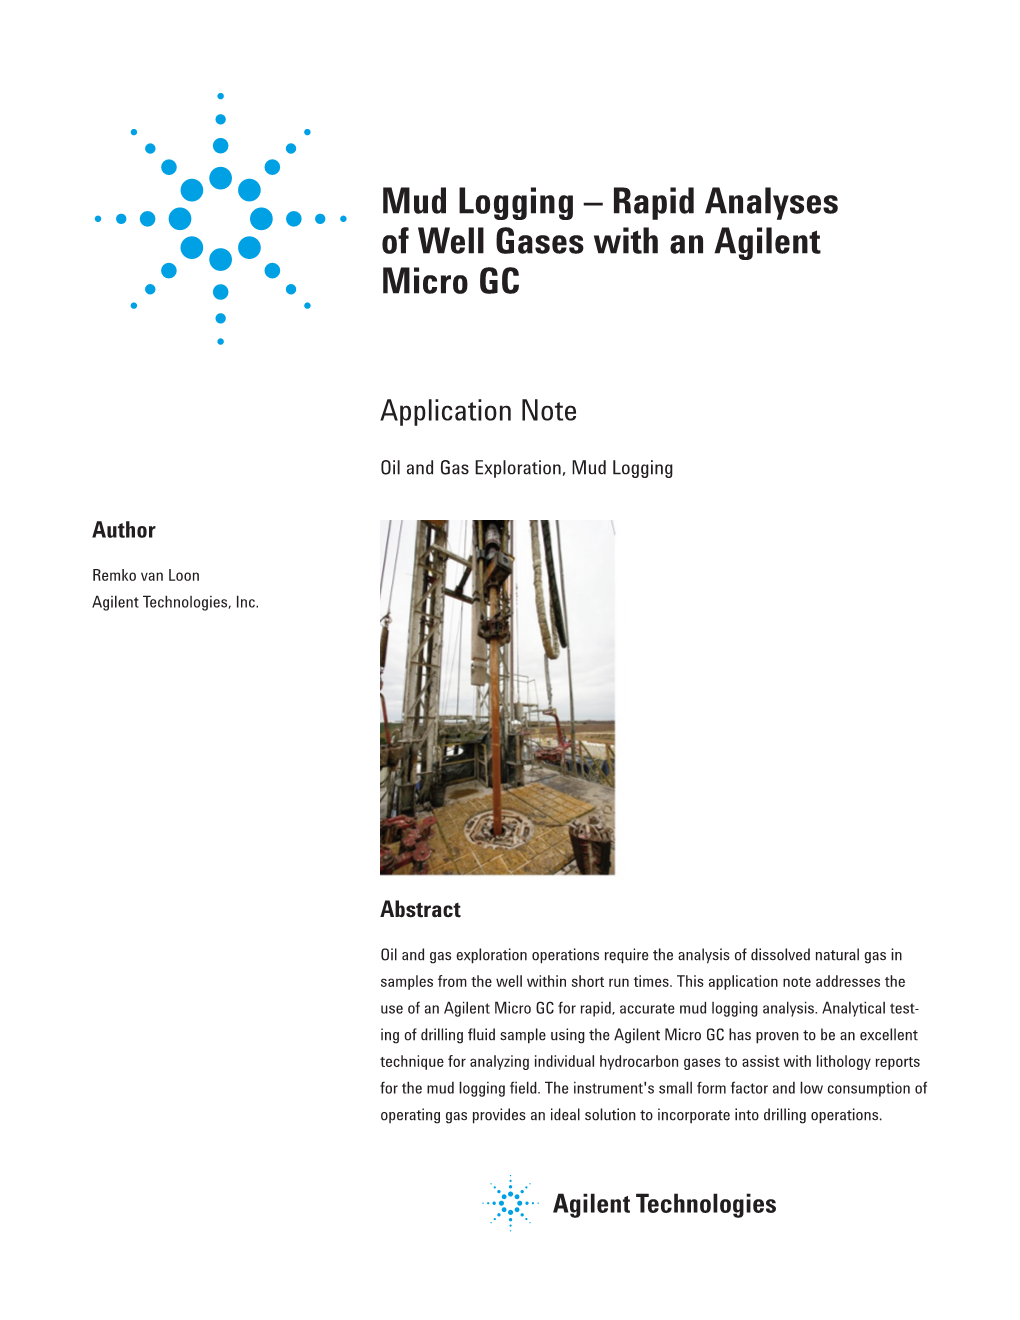 Mud Logging – Rapid Analyses of Well Gases with an Agilent Micro GC